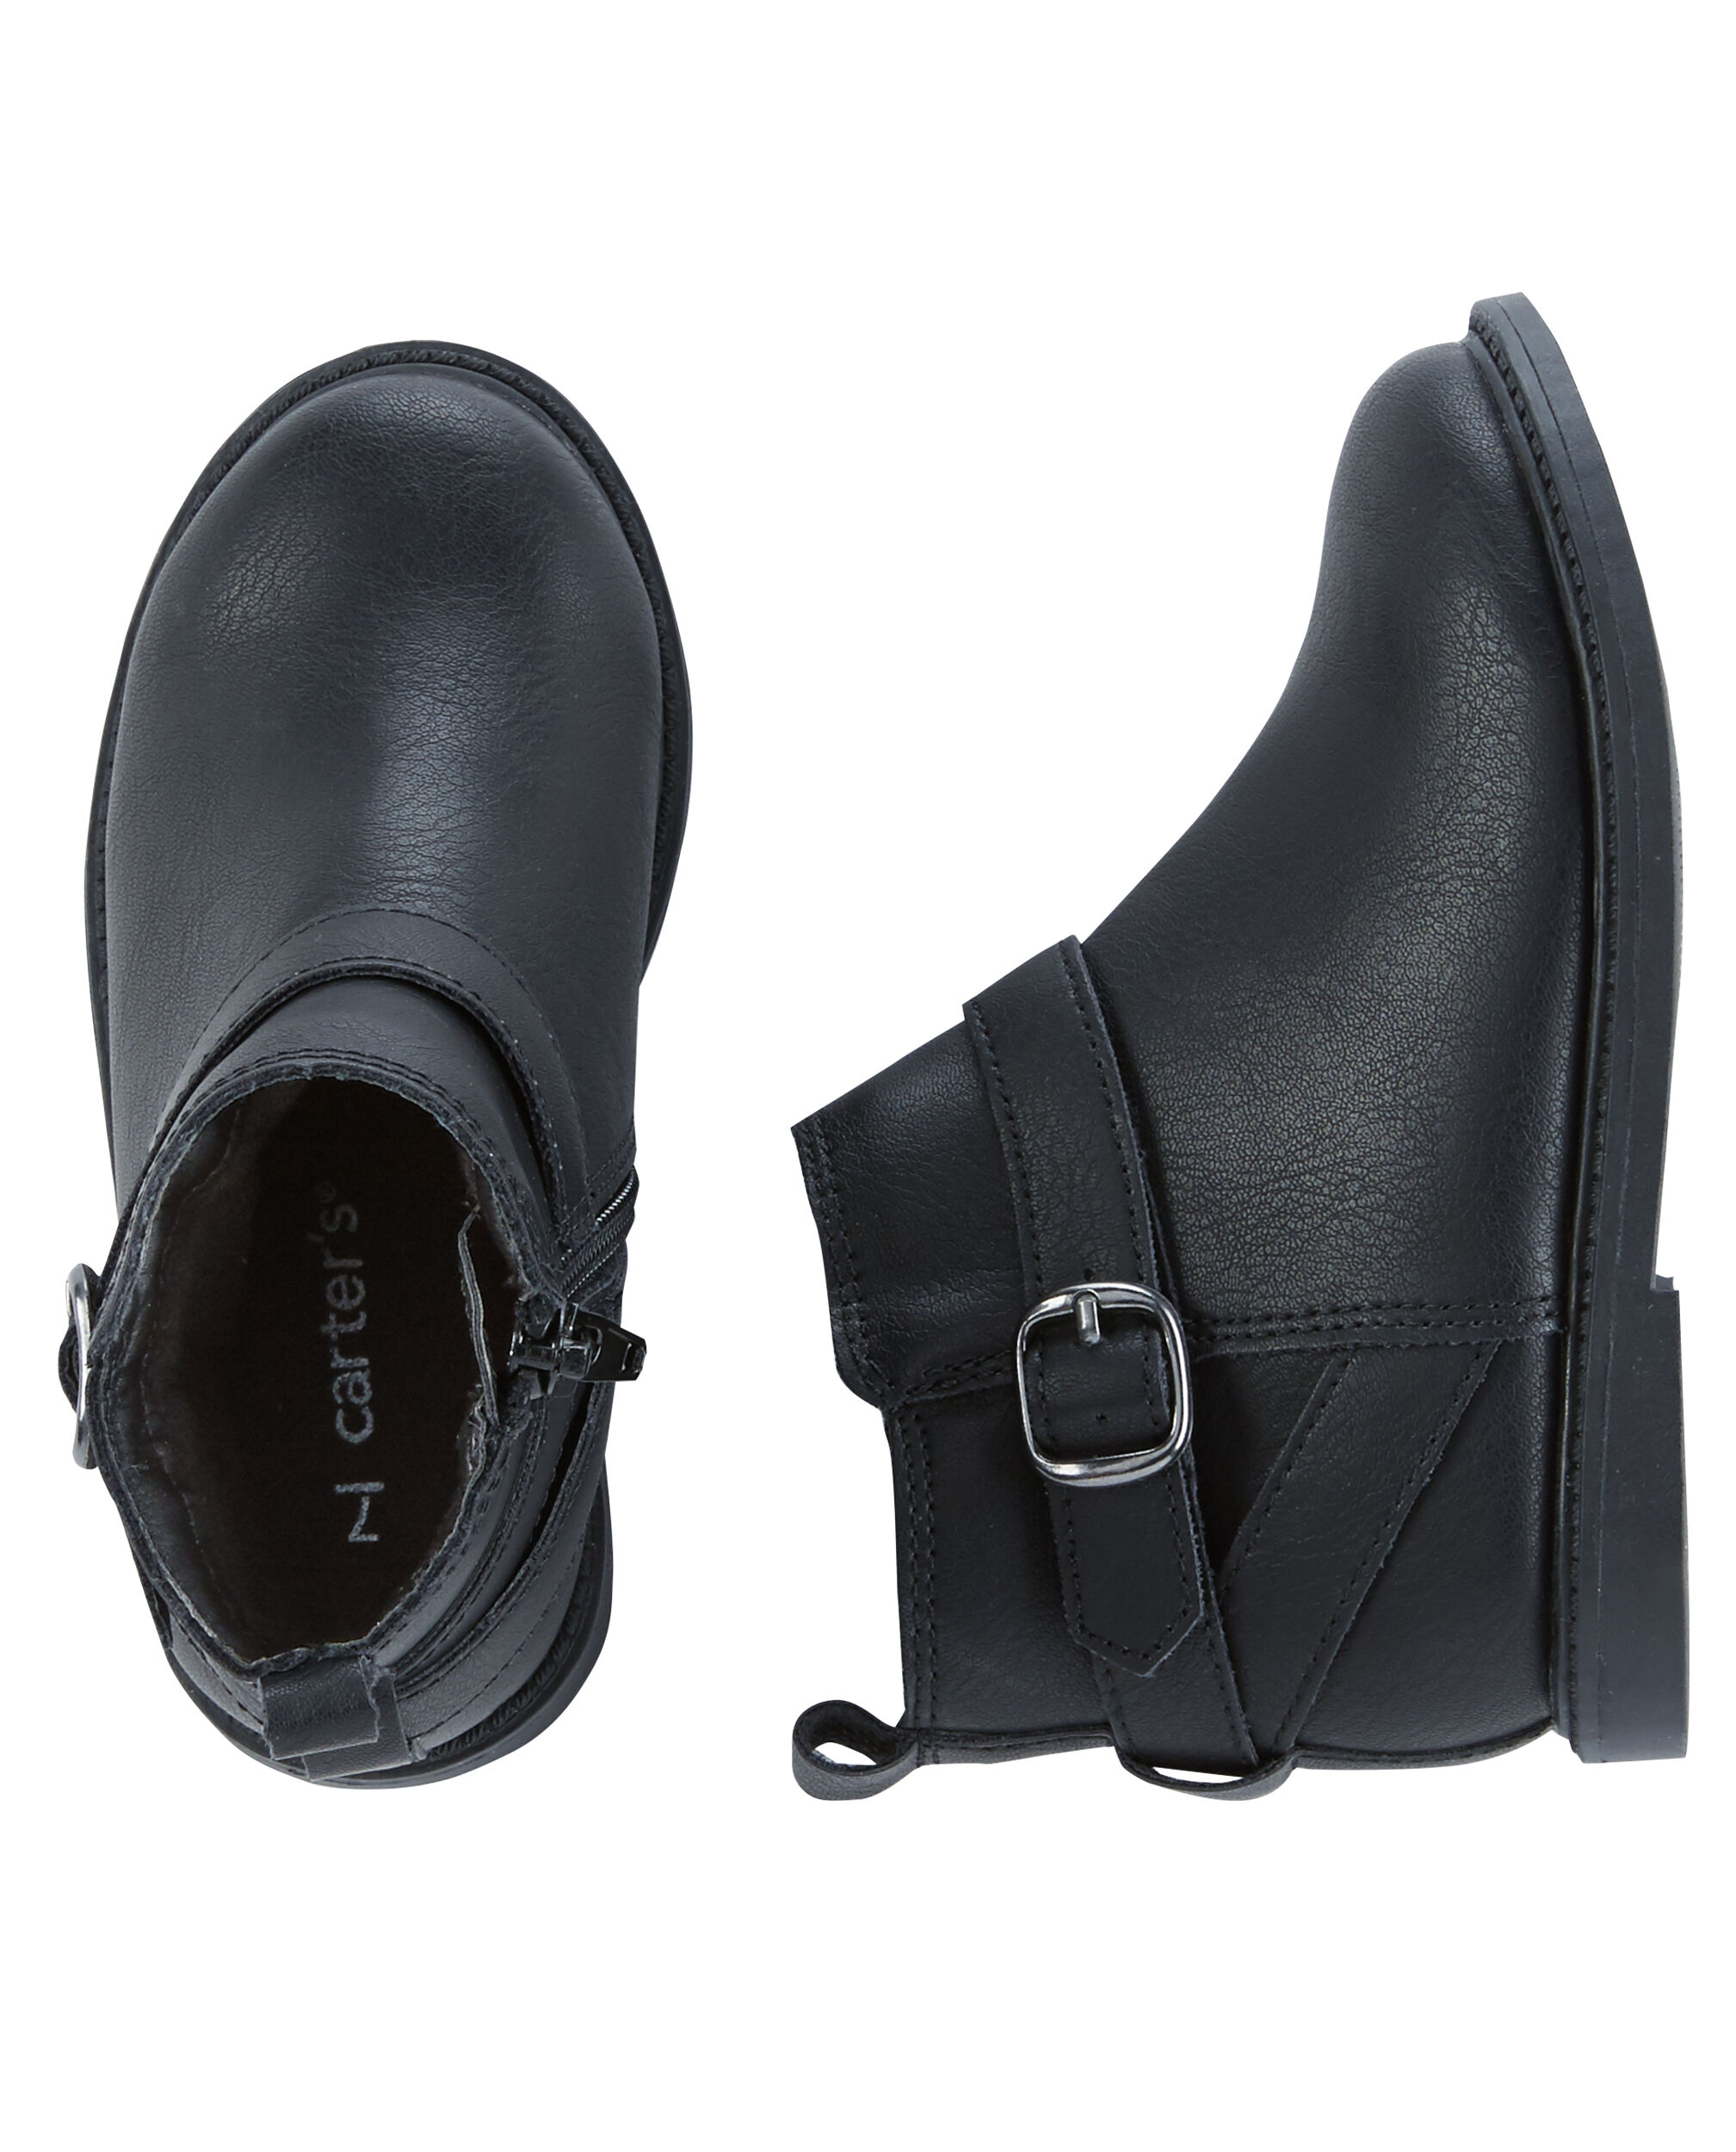 Carter's Buckle Ankle Boots | carters.com